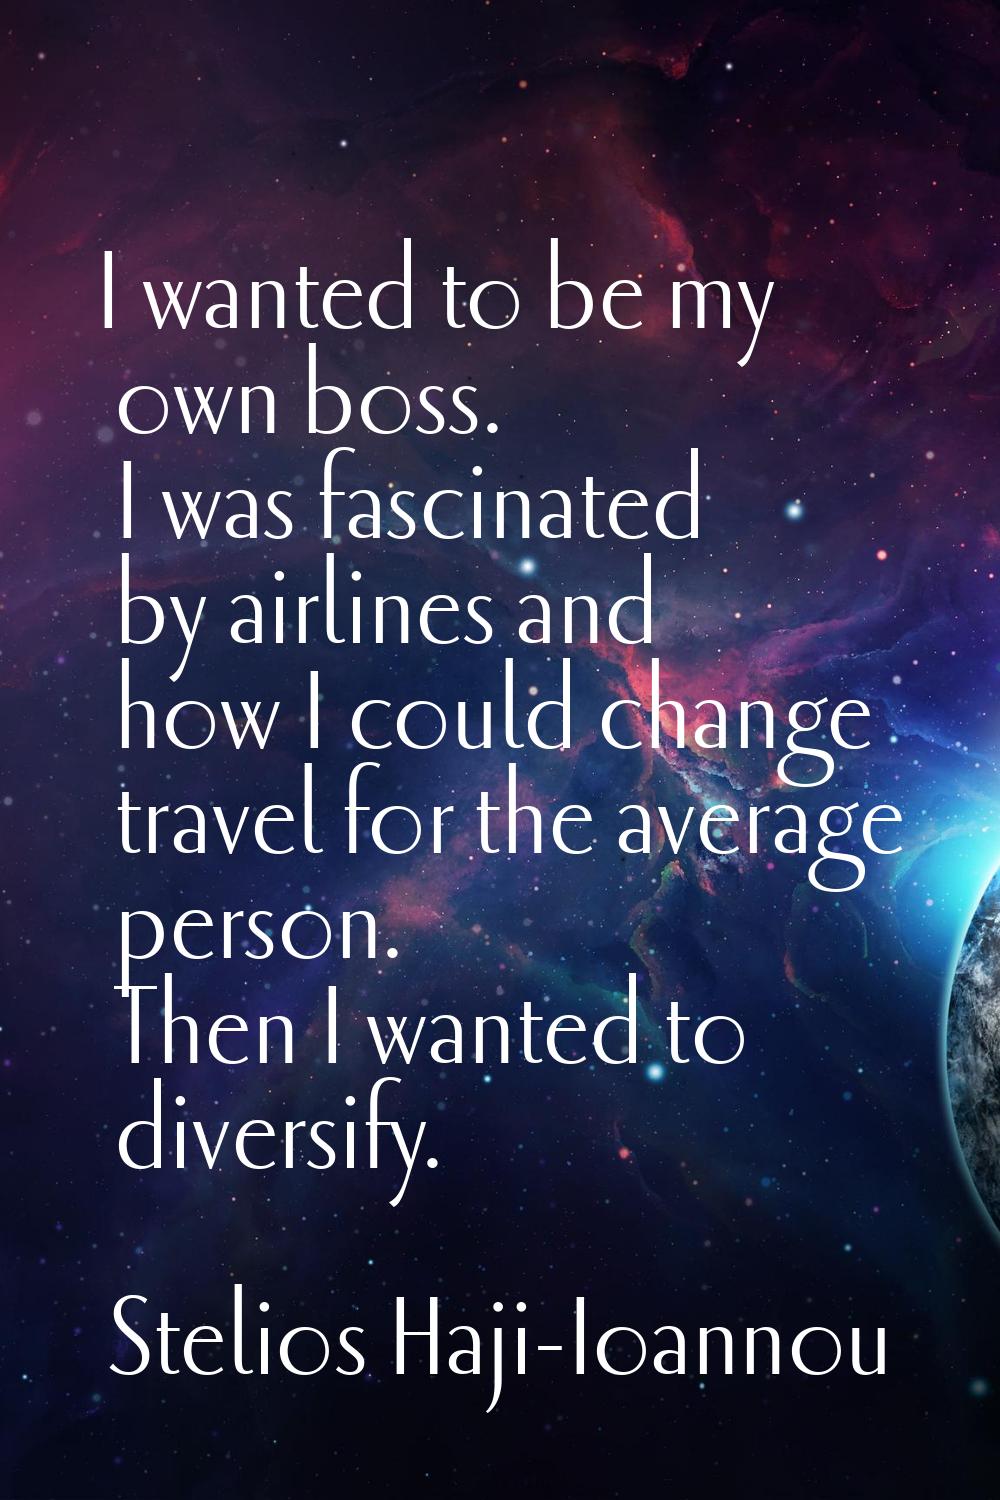 I wanted to be my own boss. I was fascinated by airlines and how I could change travel for the aver